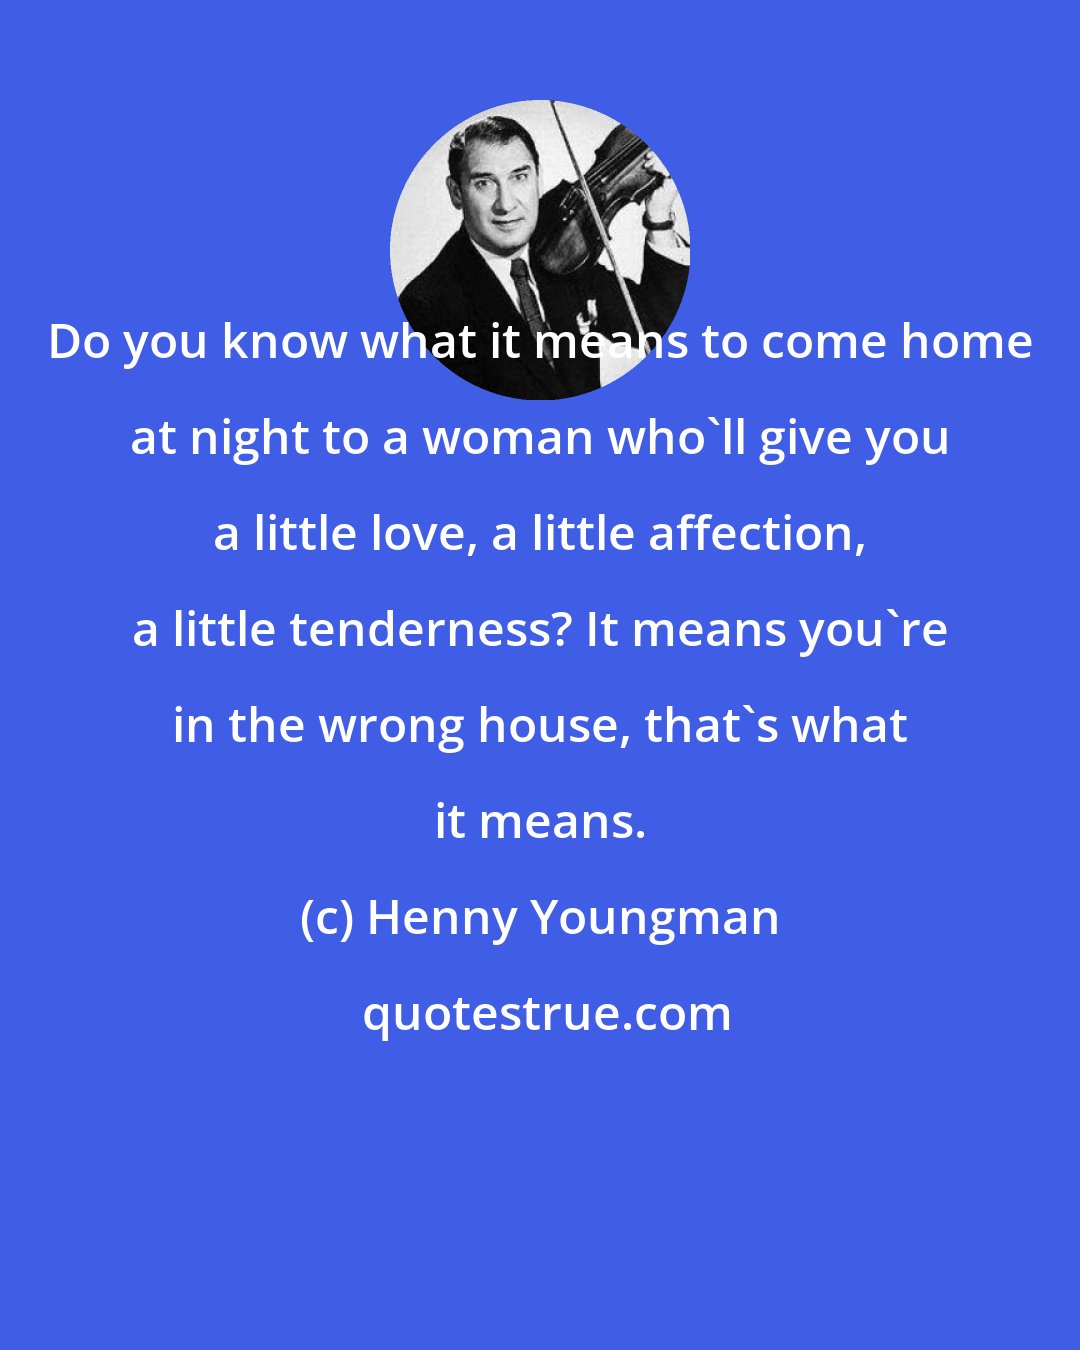 Henny Youngman: Do you know what it means to come home at night to a woman who'll give you a little love, a little affection, a little tenderness? It means you're in the wrong house, that's what it means.